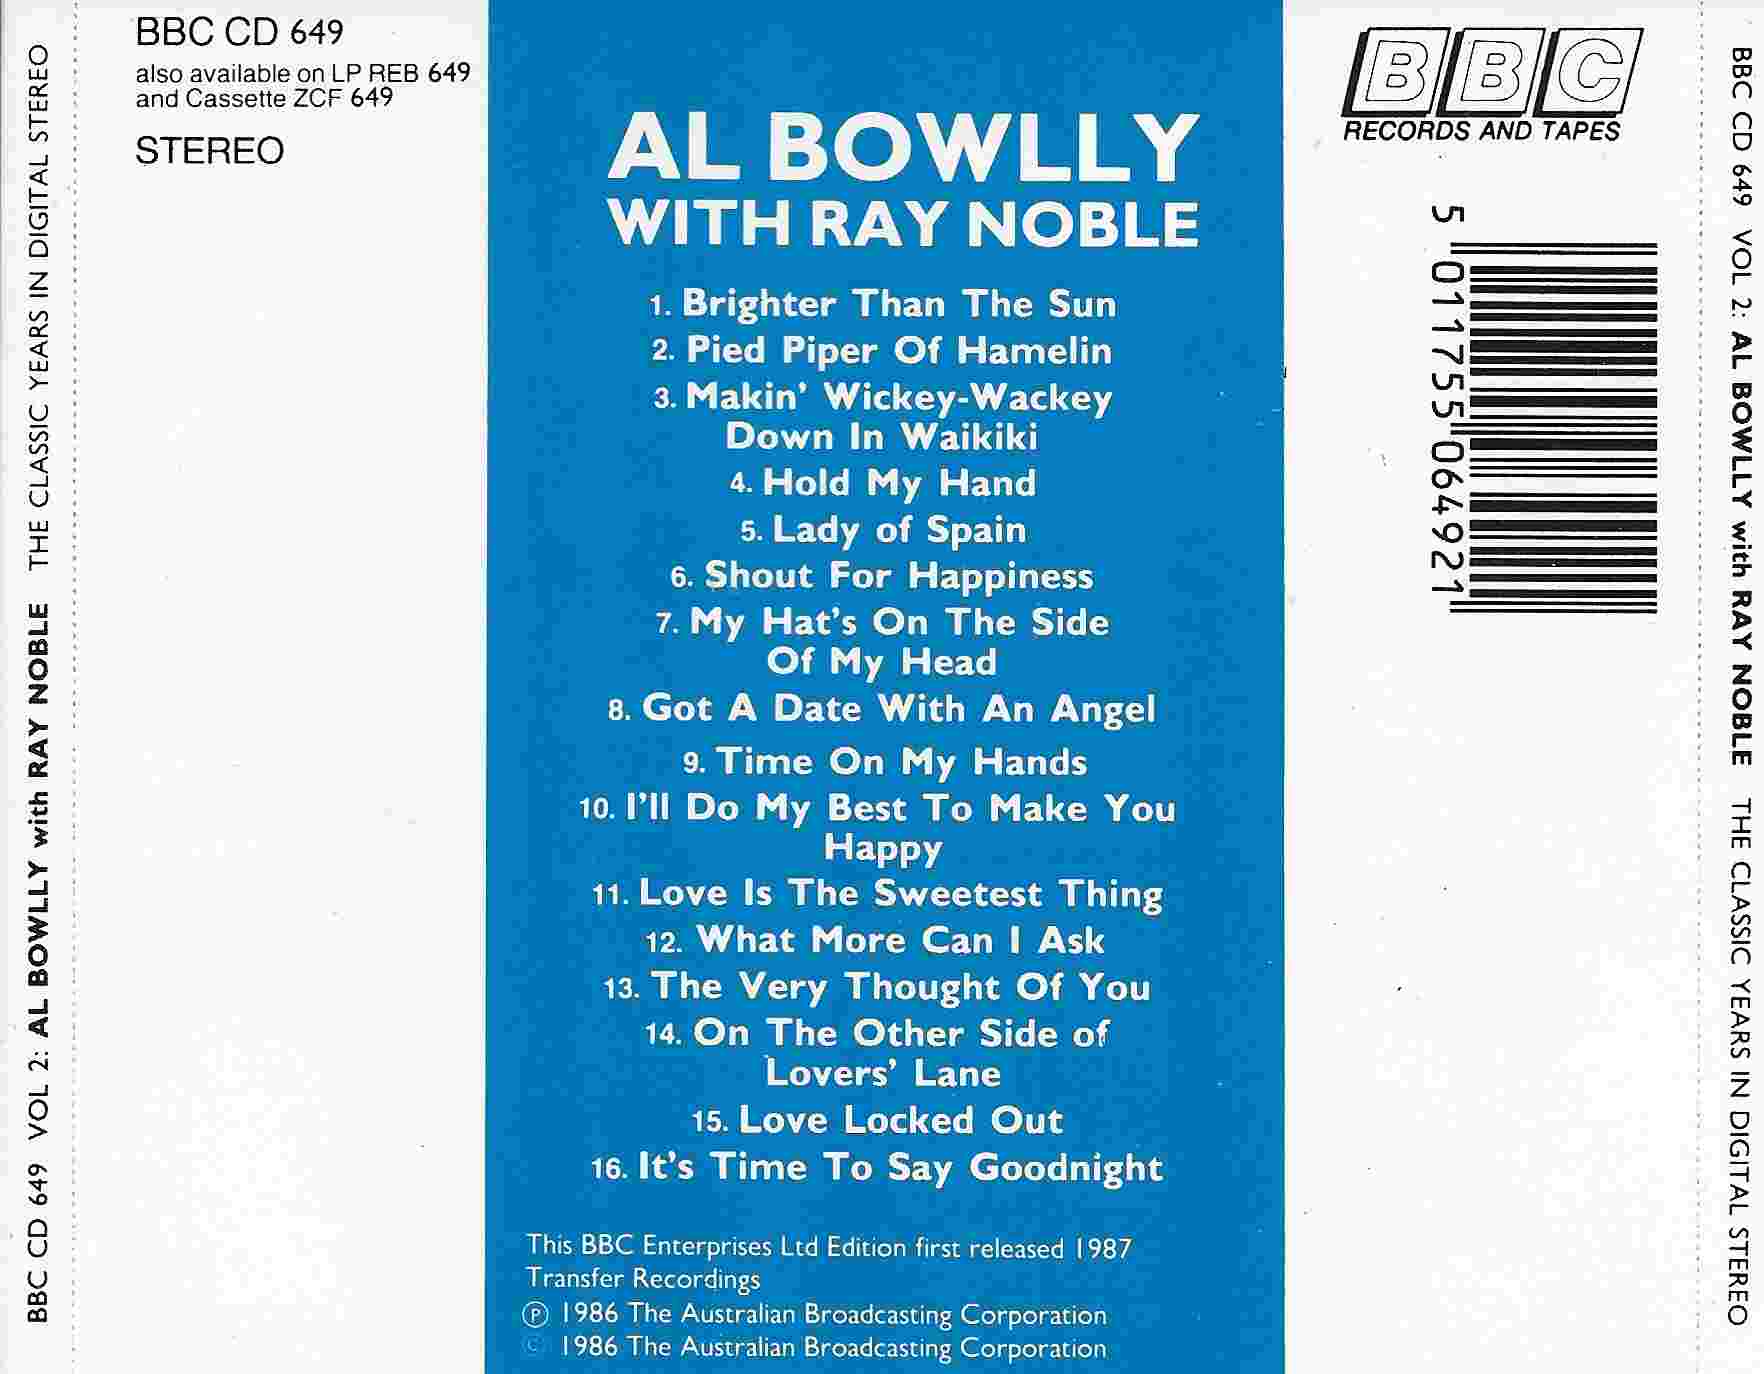 Picture of BBCCD649 Classic years - Volume 2, Al Bowlly by artist Al Bowlly from the BBC records and Tapes library